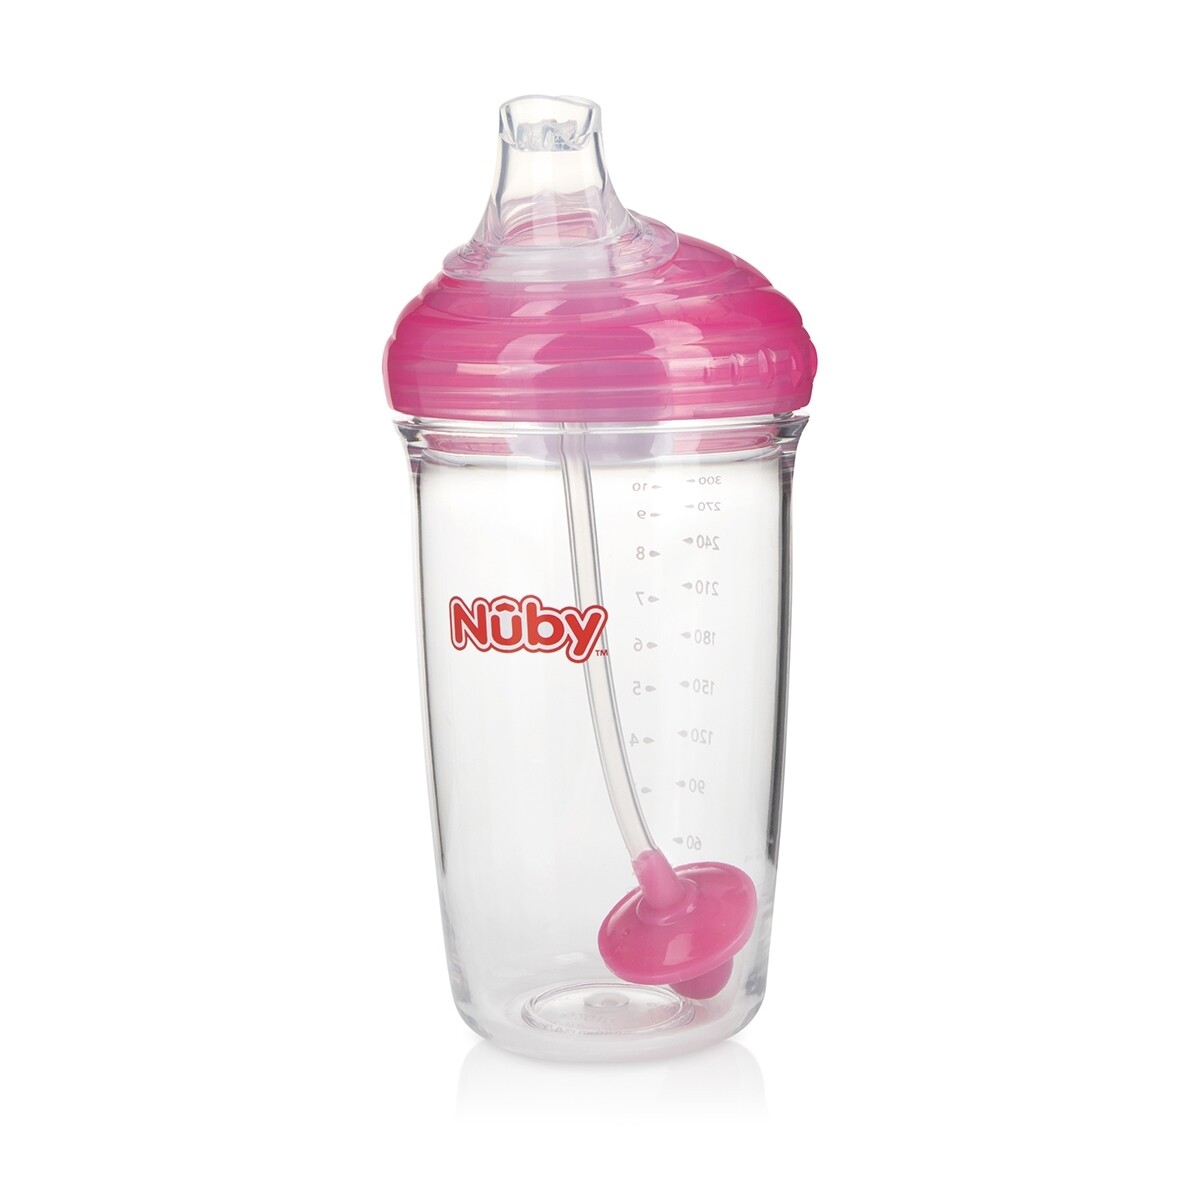 . Case of [24] Nuby? No-Spill Trainer Cups w/Hygienic Cover - Pink, 10 oz .